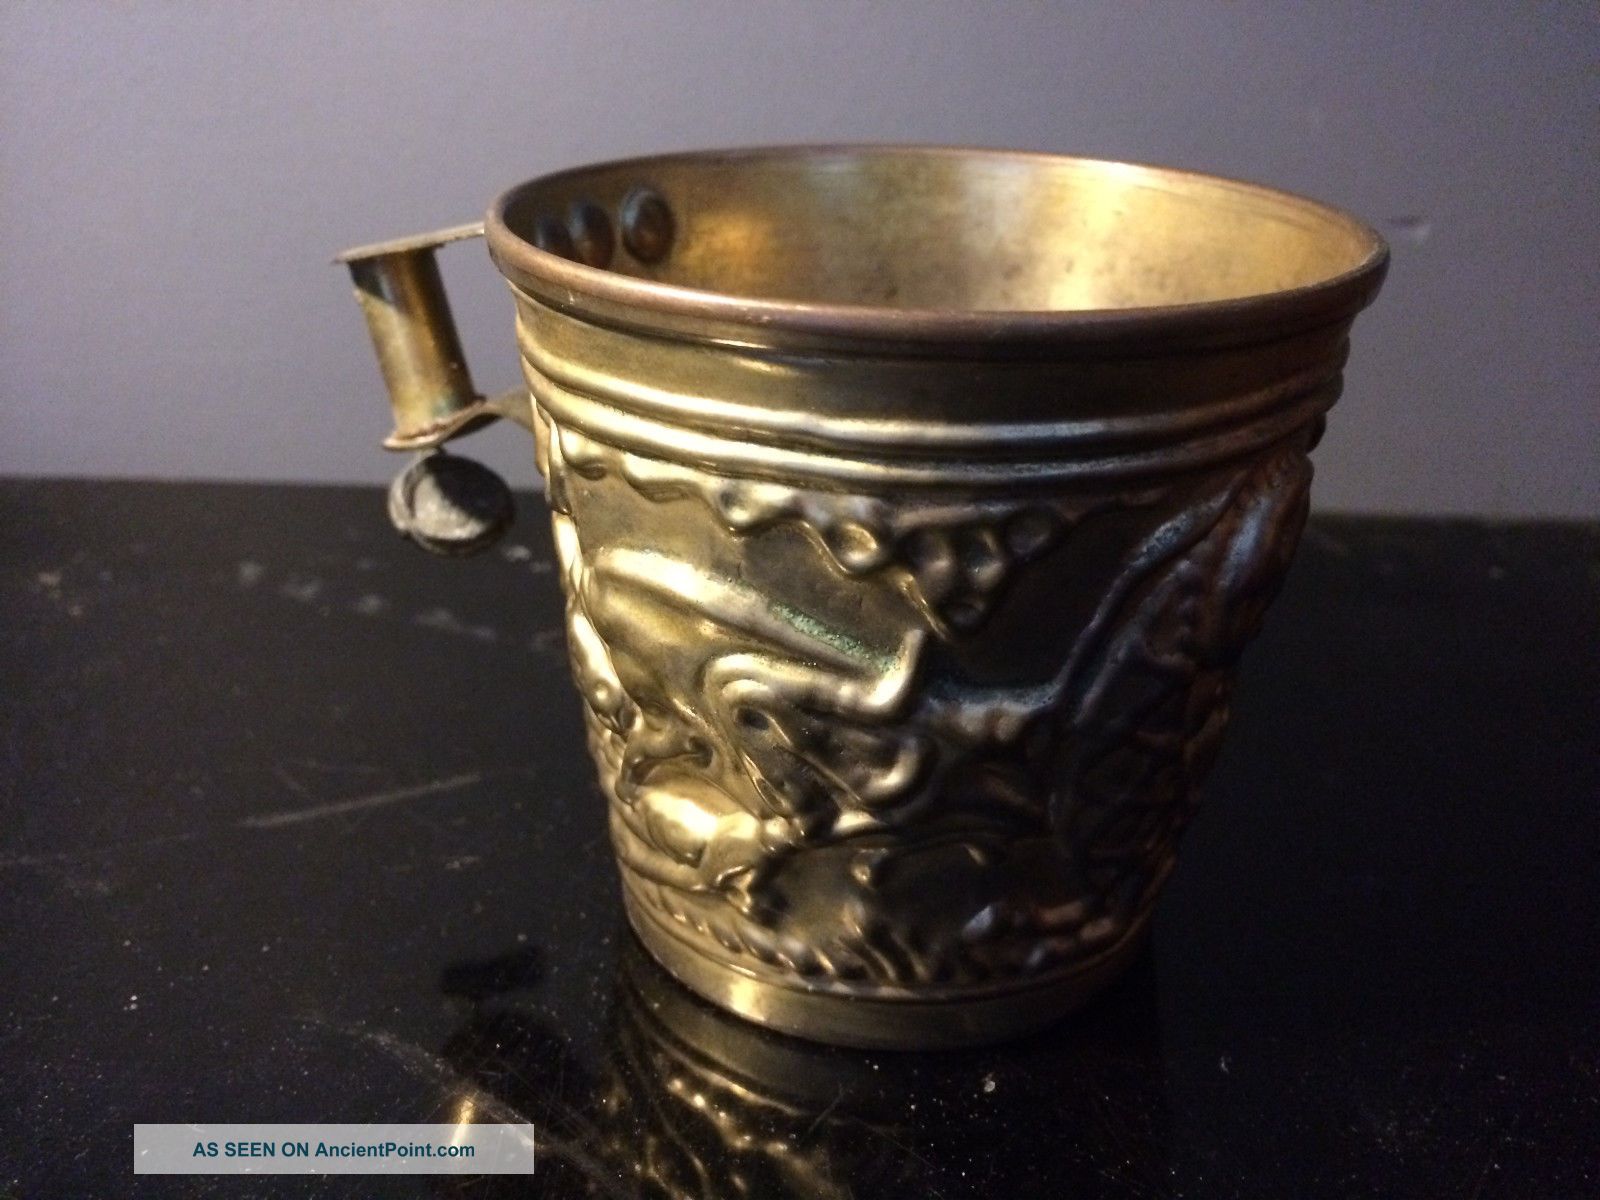 Antique Witchcraft Greek Cretan Cup Murgatroyd Witches Fred Gettings Other Ethnographic Antiques photo